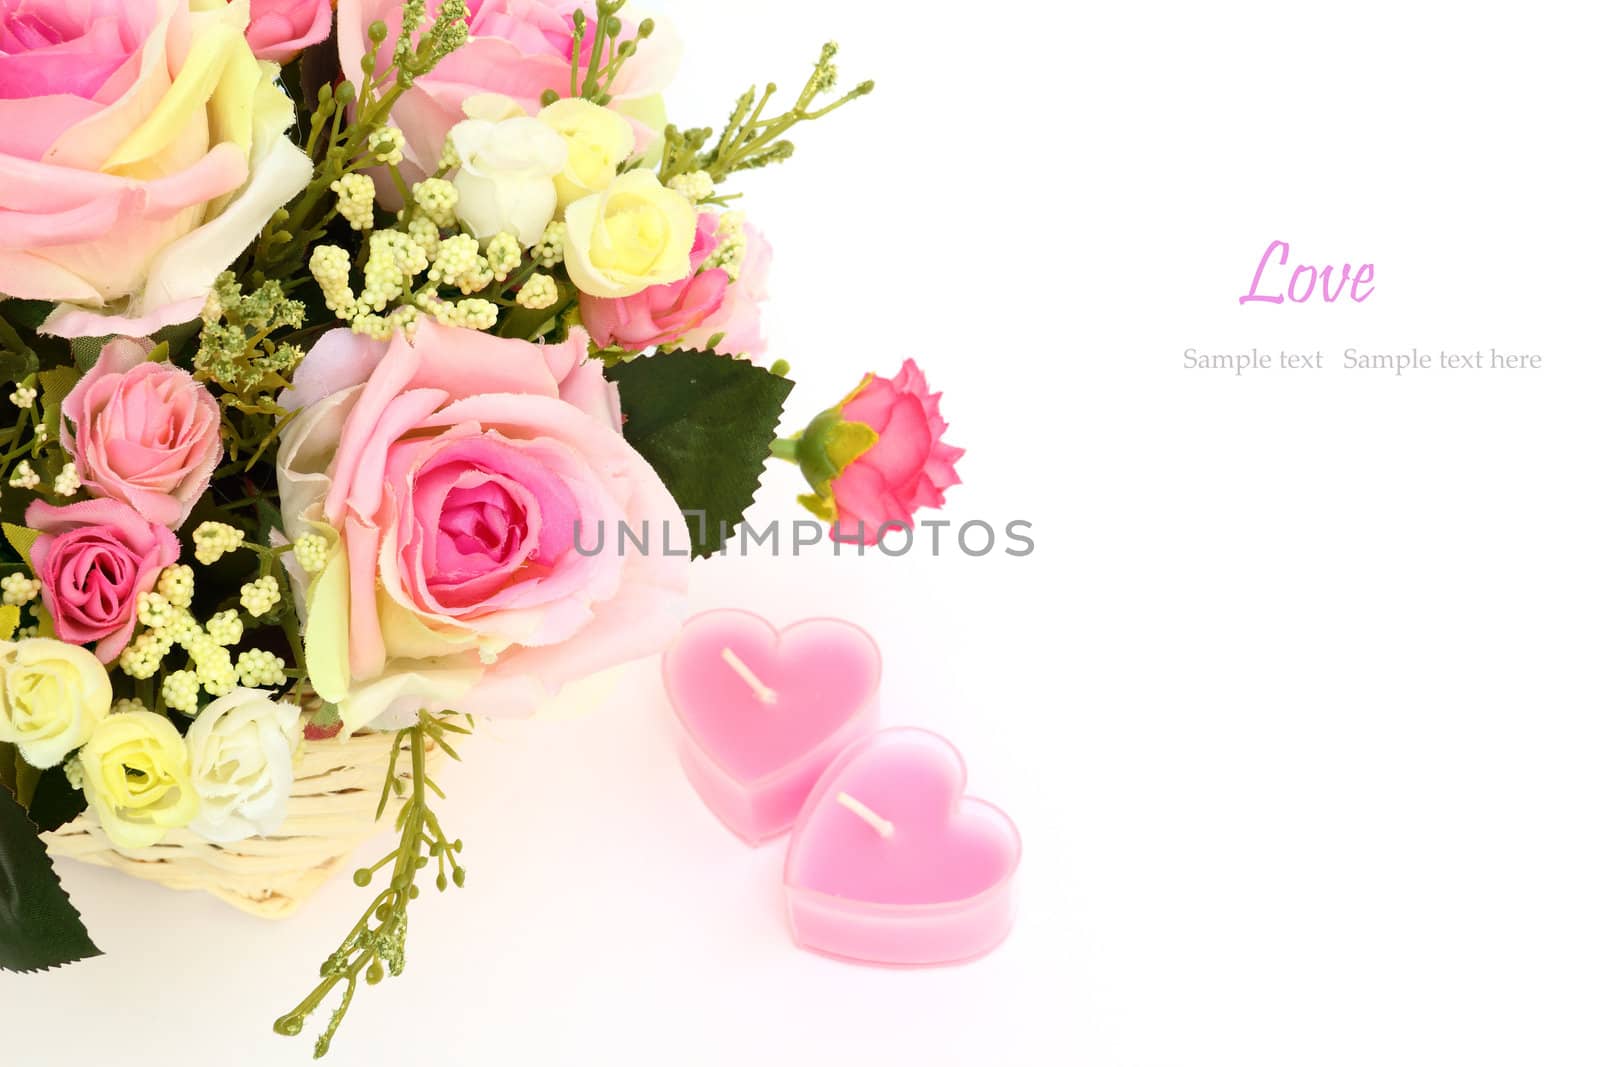 Beautiful flowers in a white basket and two heart candles isolated on white with space for text.